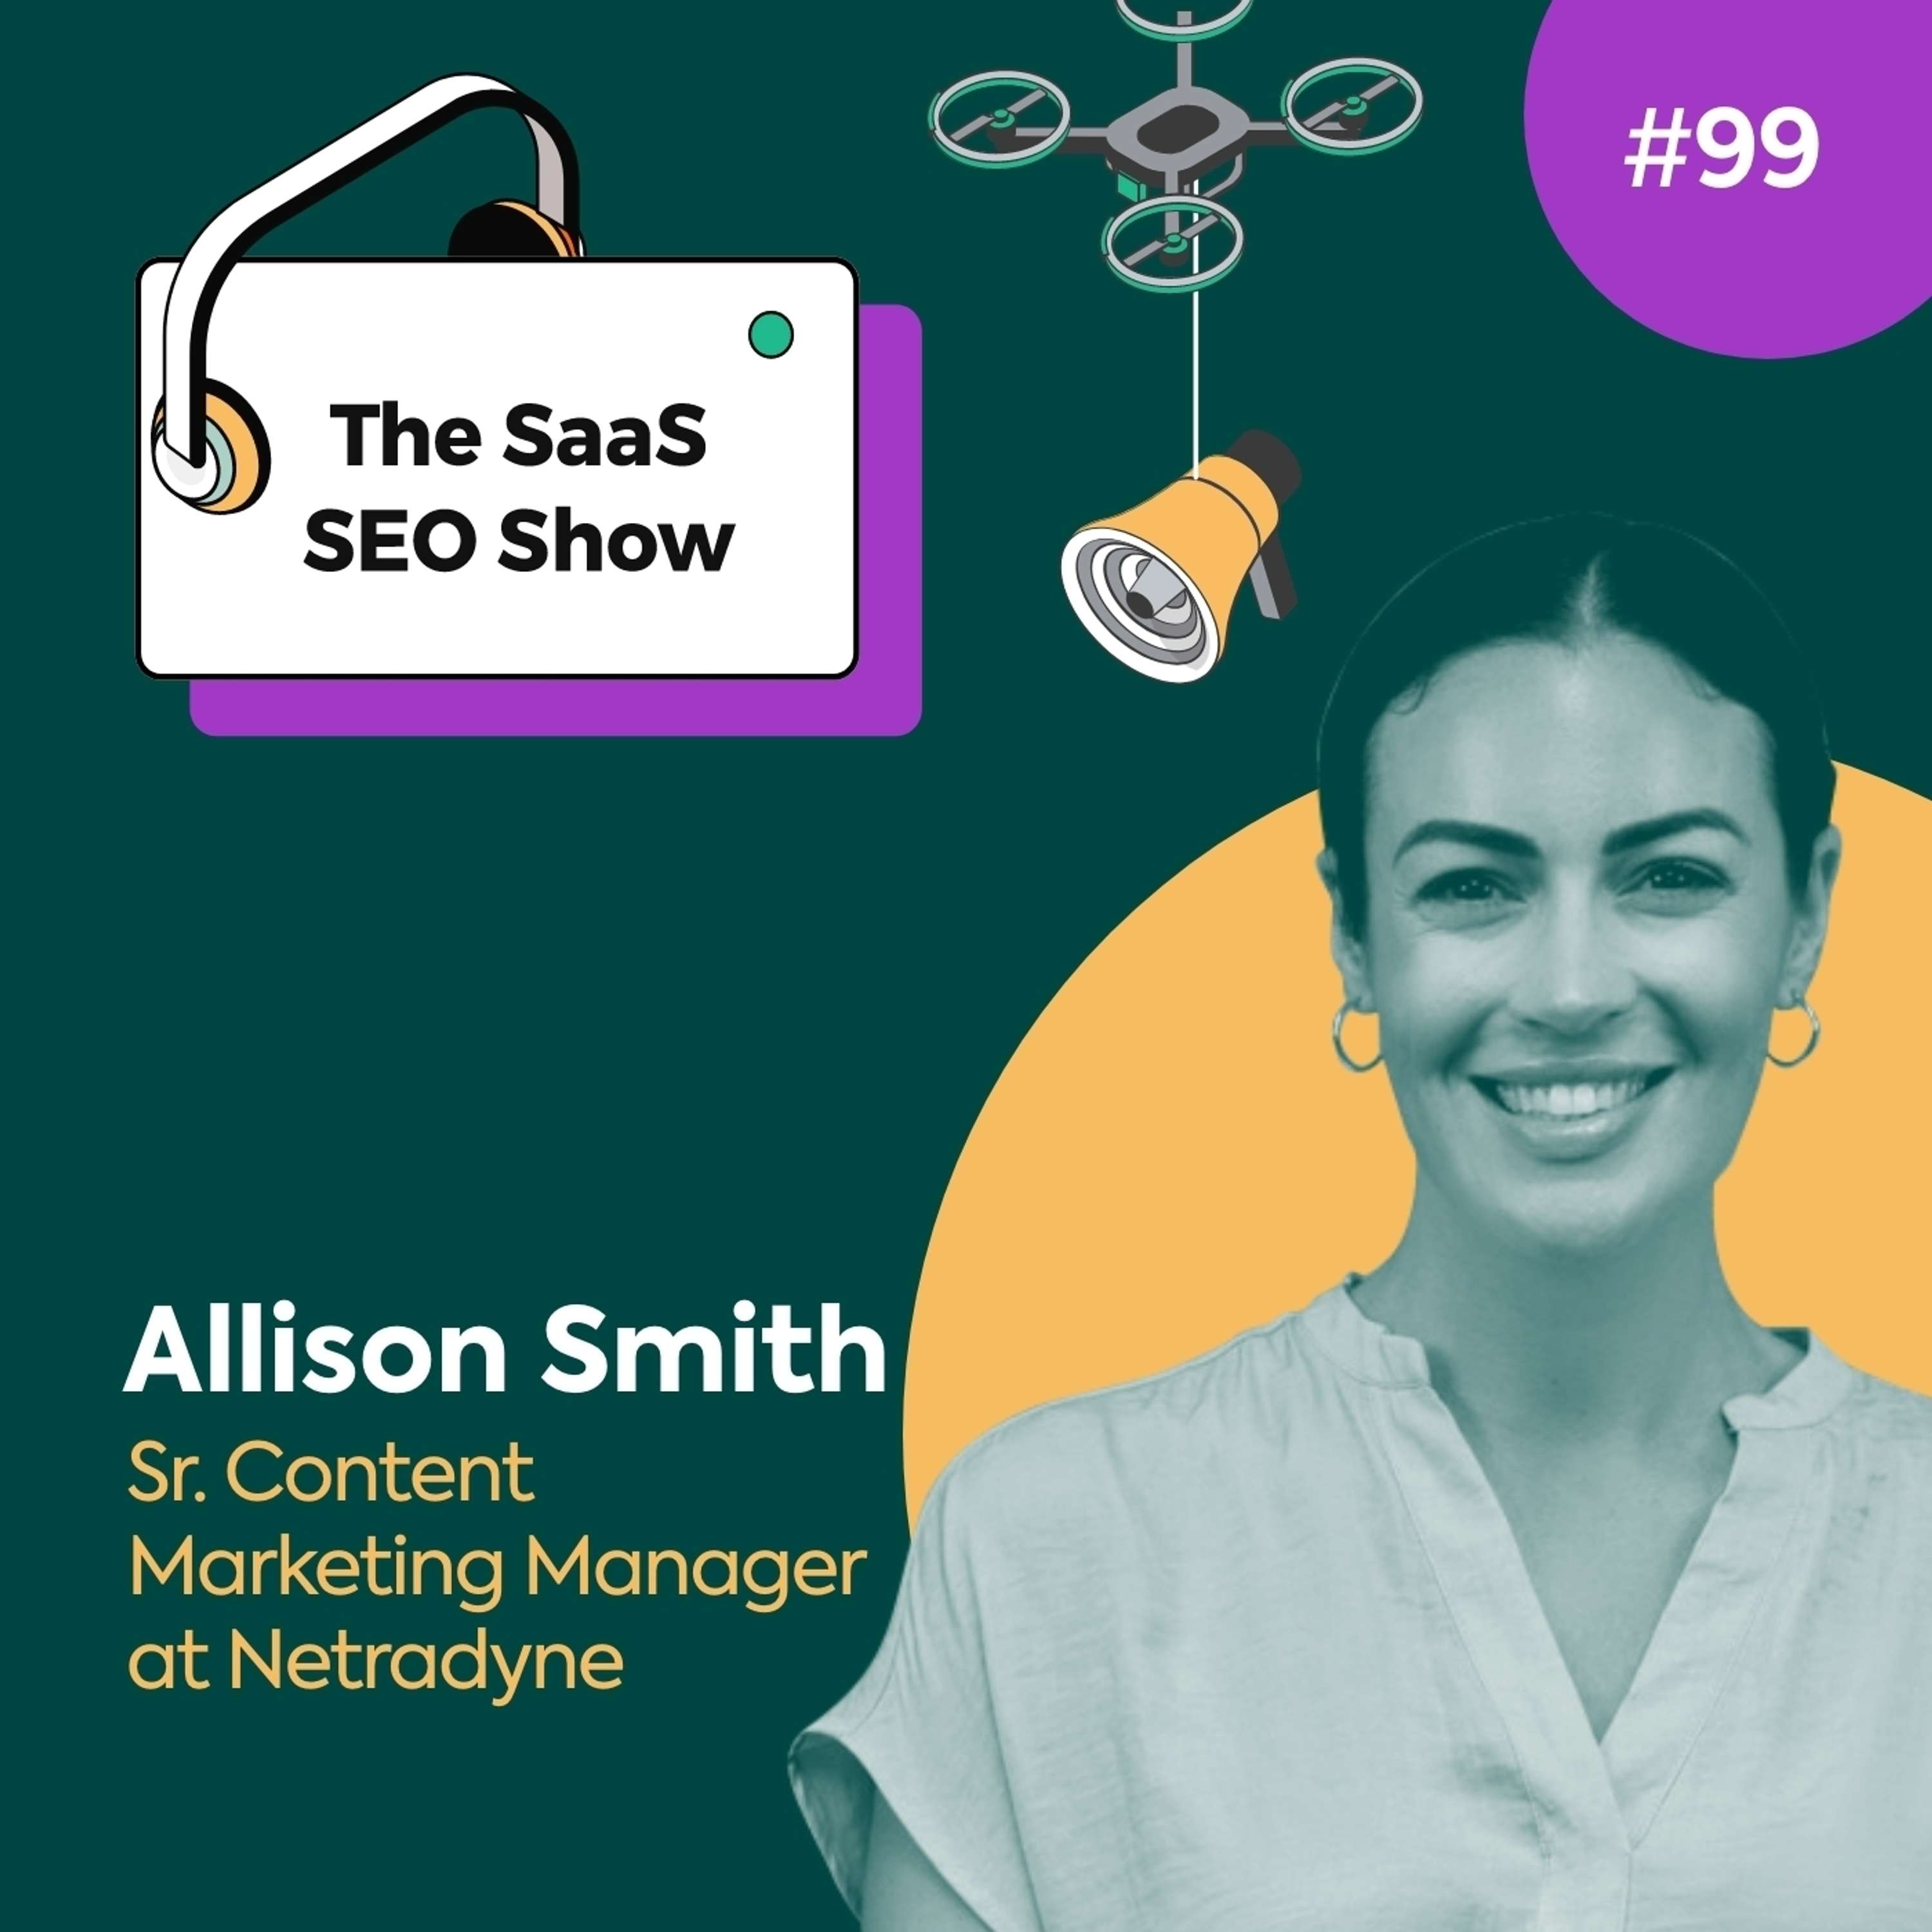 Criteria-based Content with Allison Smith, Sr. Content Marketing Manager at Netradyne #99